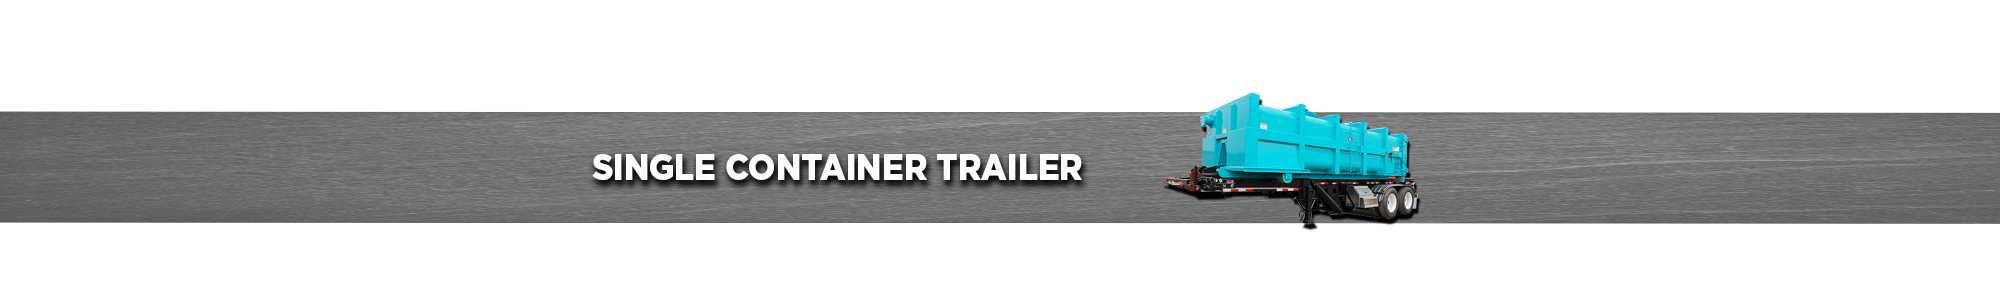 SINGLE CONTAINER TRAILER